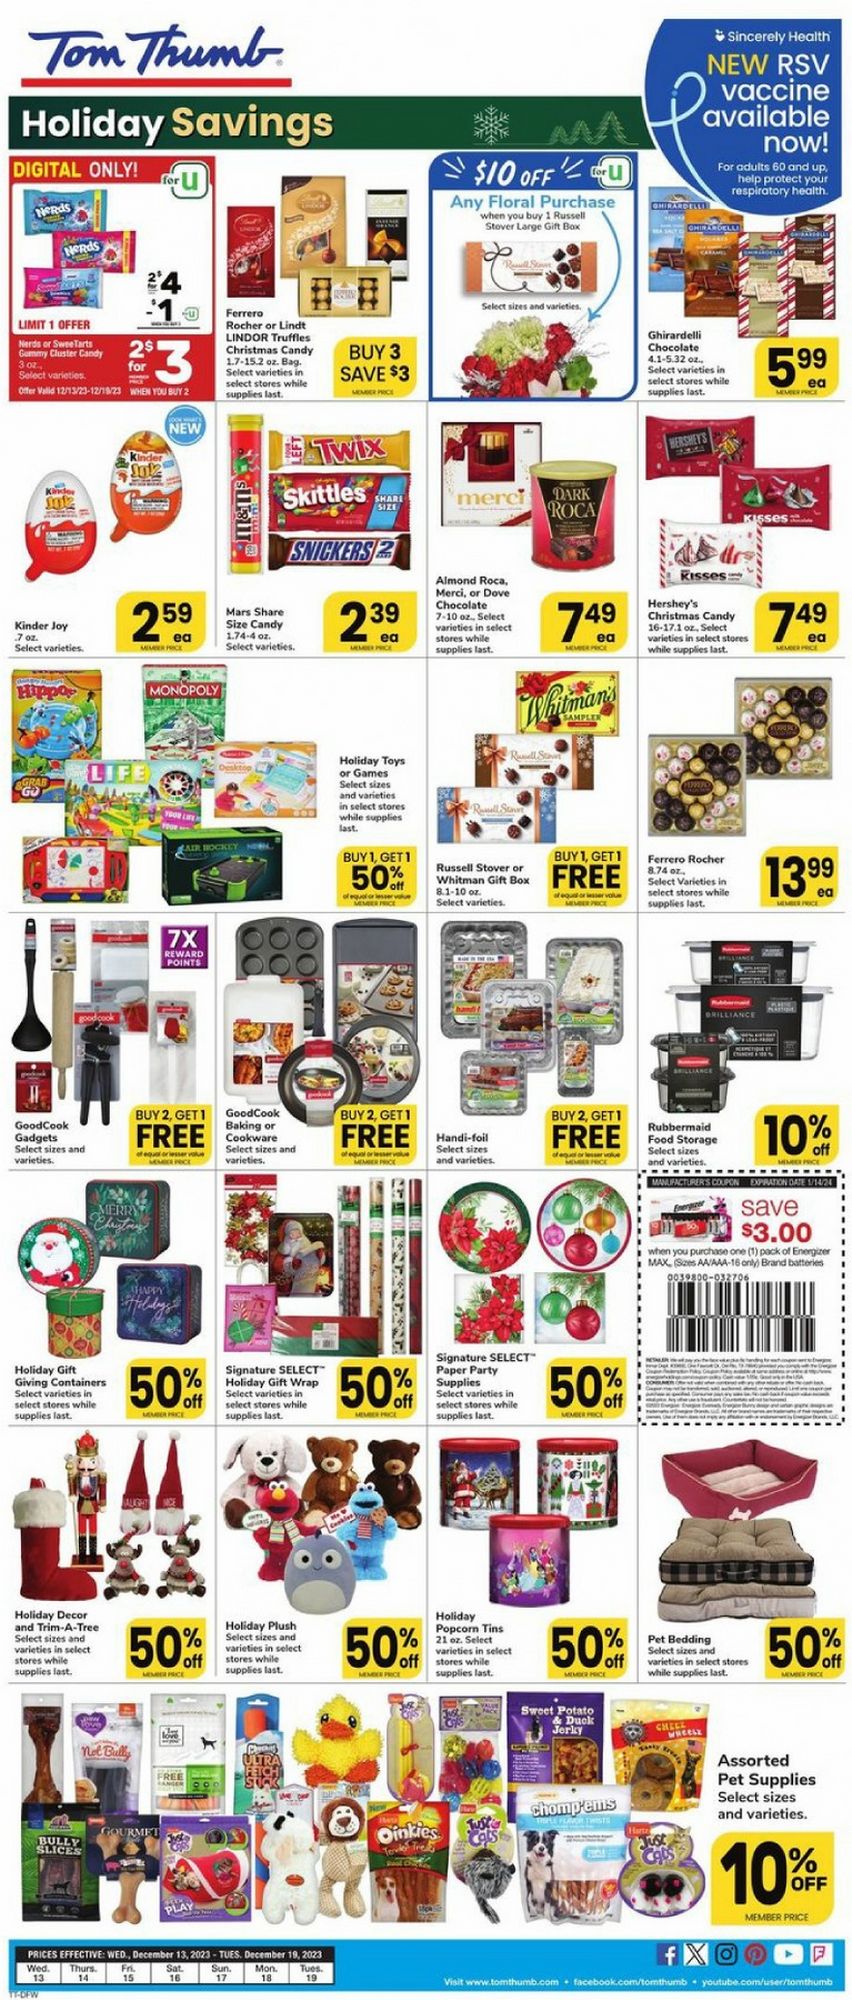 Tom Thumb Christmas July 2024 Weekly Sales, Deals, Discounts and Digital Coupons.